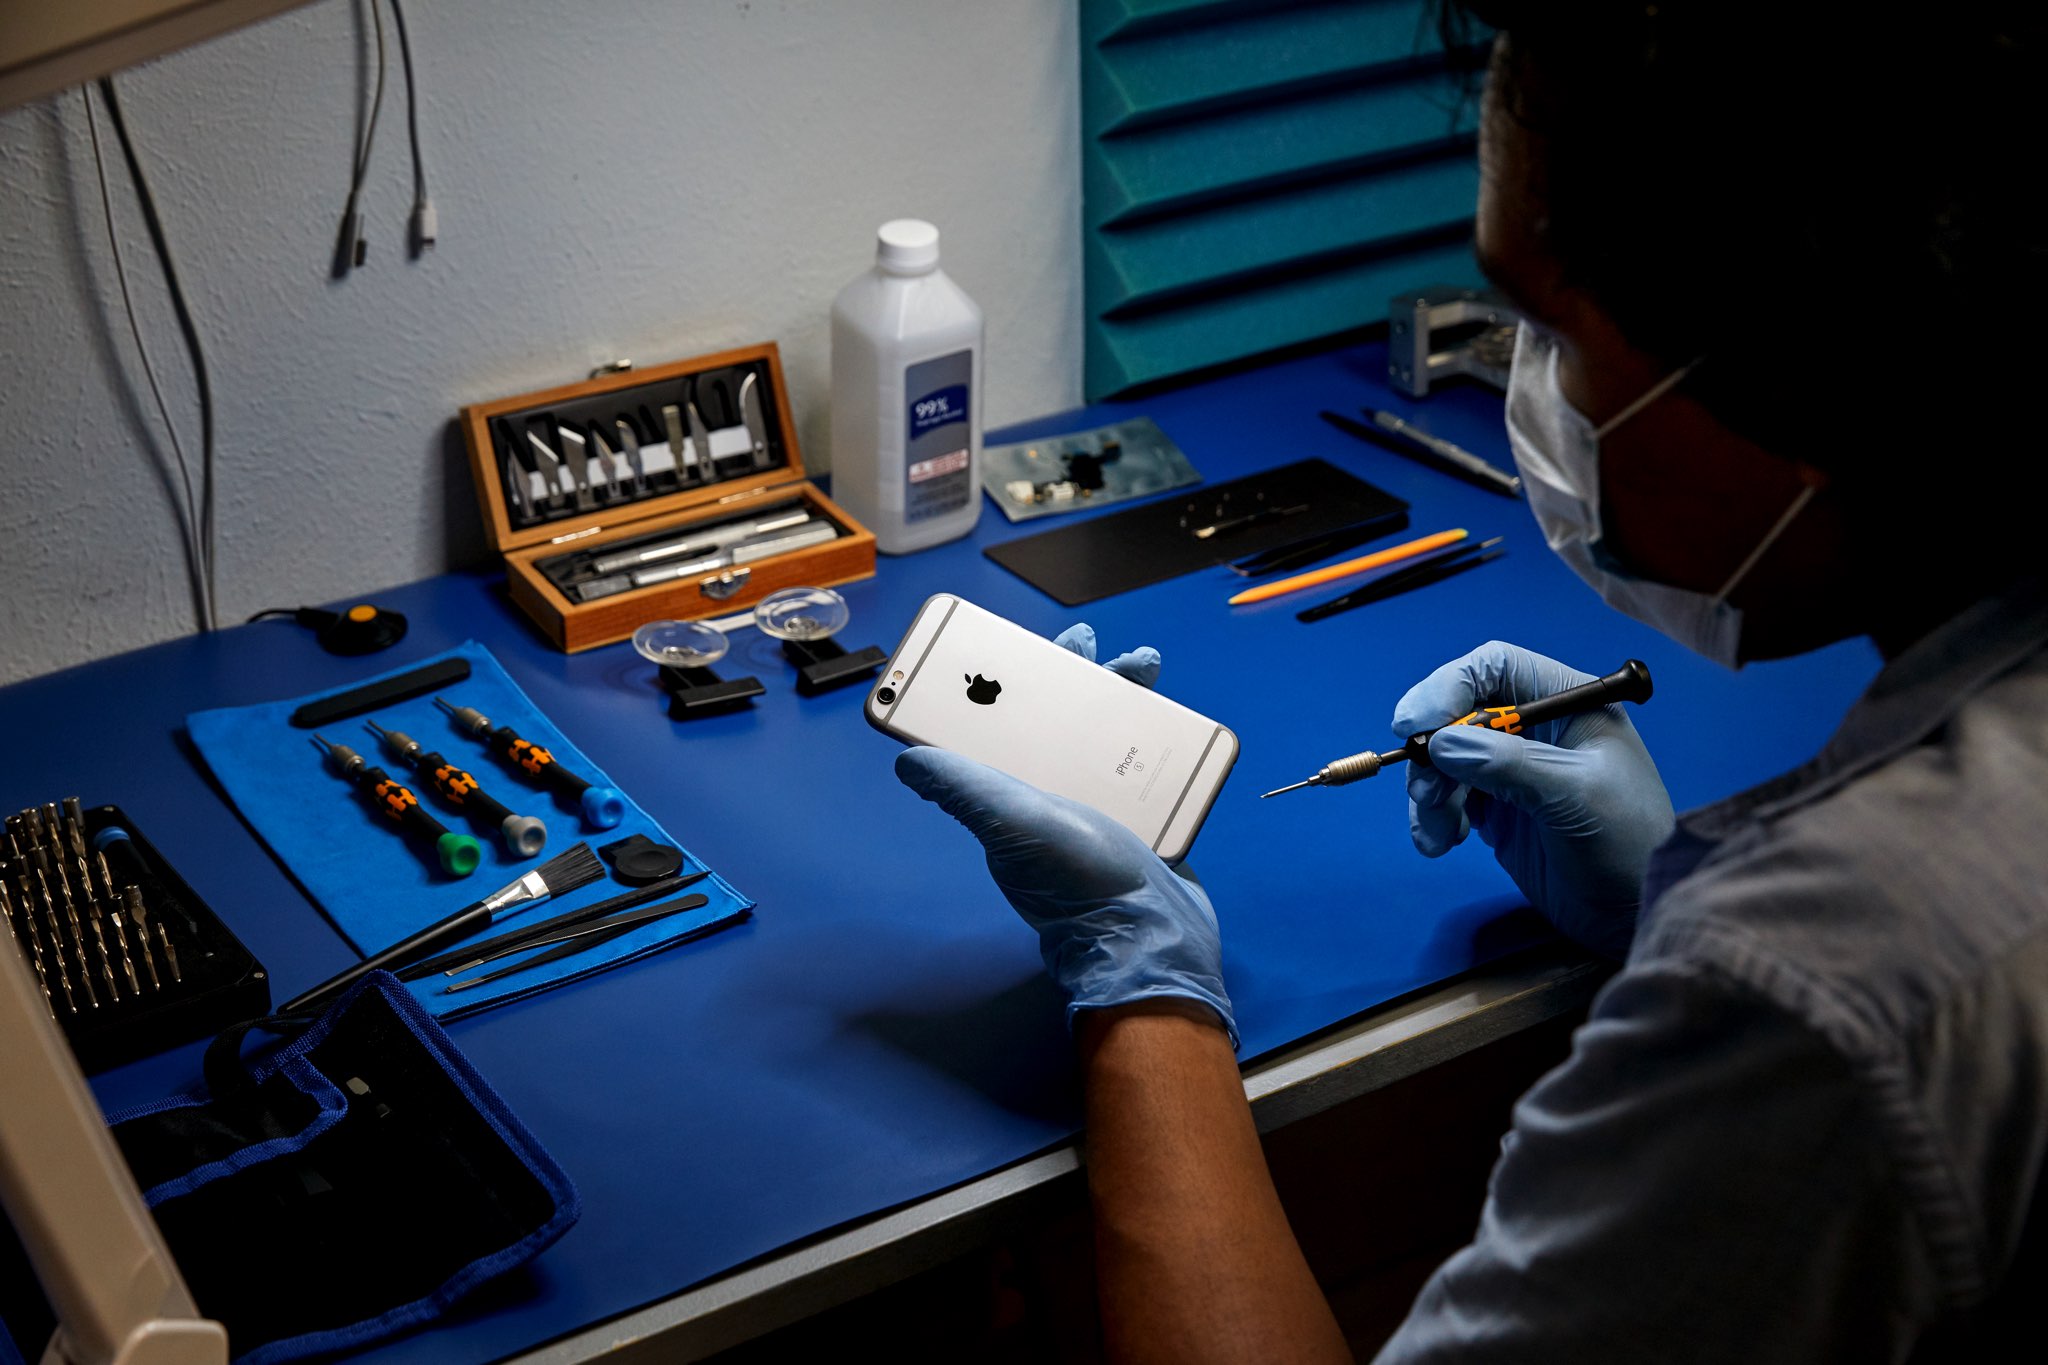 This marketing image from Apple shows an independent repair provider using genuine parts to service an iPhone